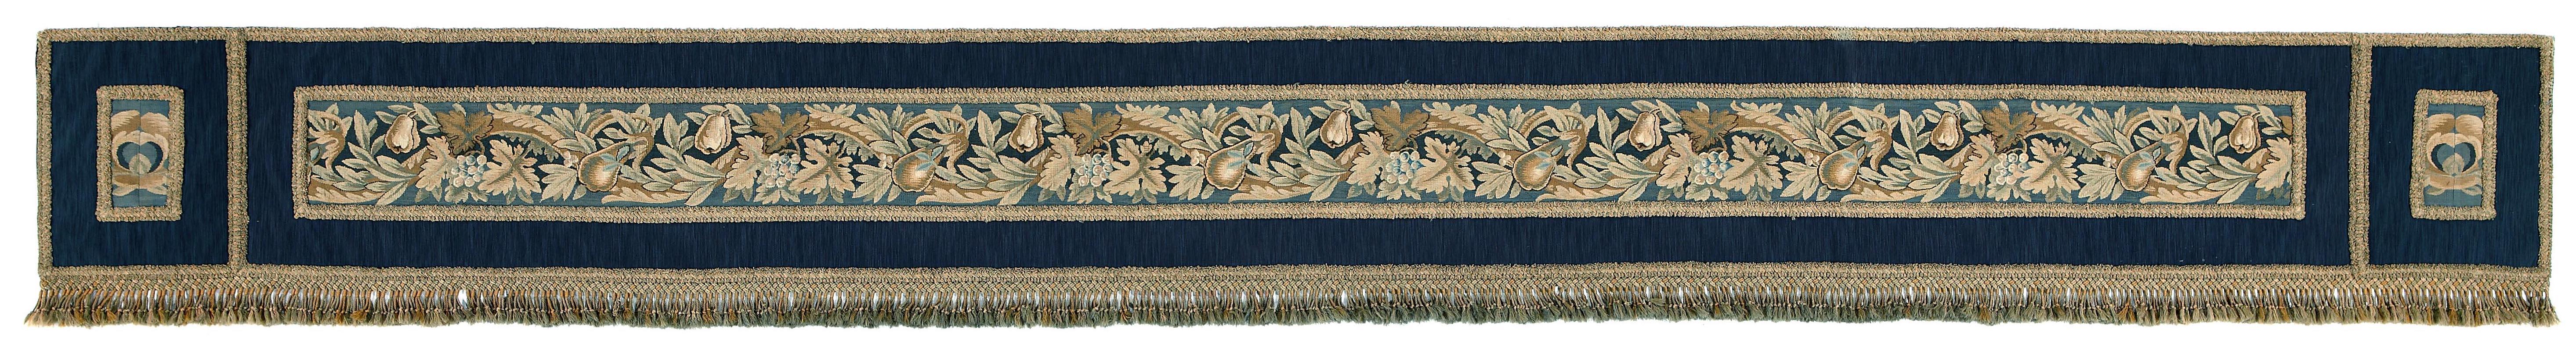 This pelmet is exceptionally long. The Brussels tapestry is finely woven with fruits and trailing stems and the colours are not faded. It works as a hanging in its own right, but could also be adapted as a curtain or bed pelmet.
 
Measures: Total